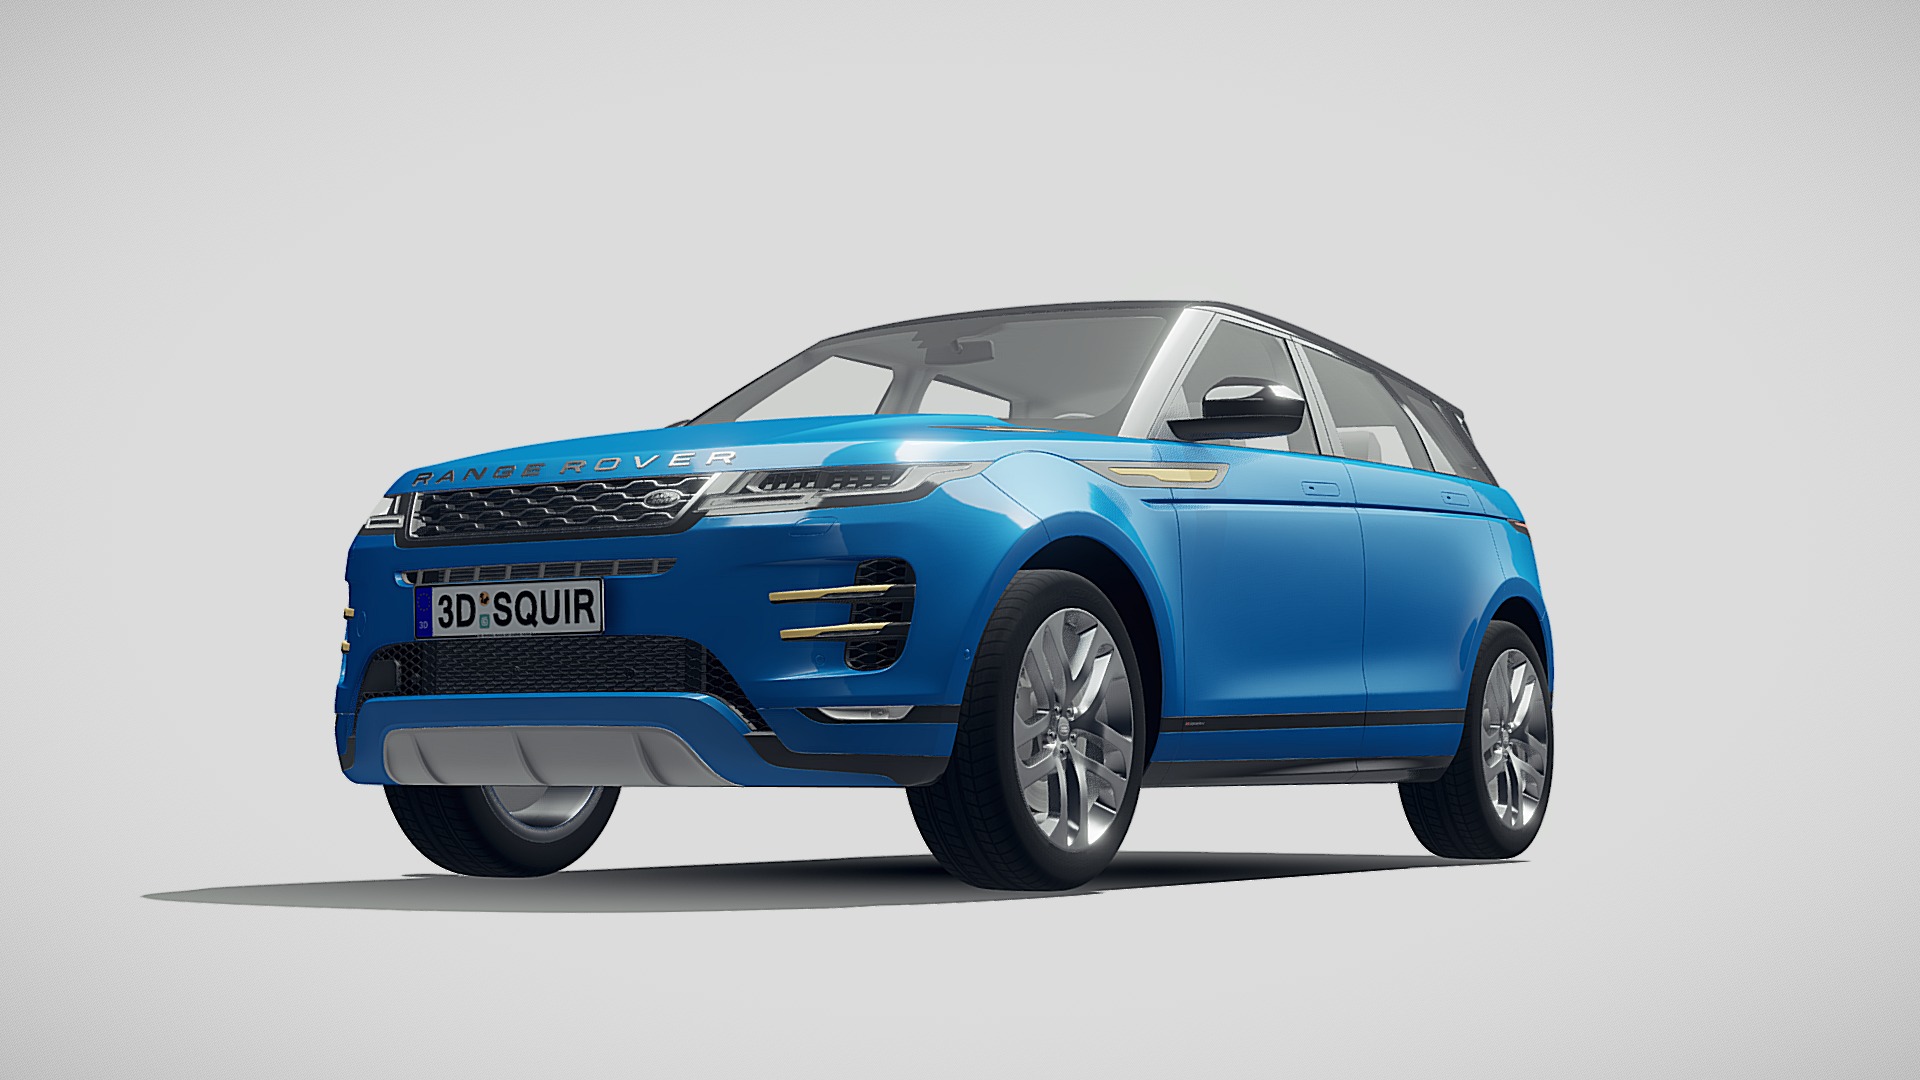 3D model Land Rover Evoque 2020 R Dynamic - This is a 3D model of the Land Rover Evoque 2020 R Dynamic. The 3D model is about a blue car with a white background.